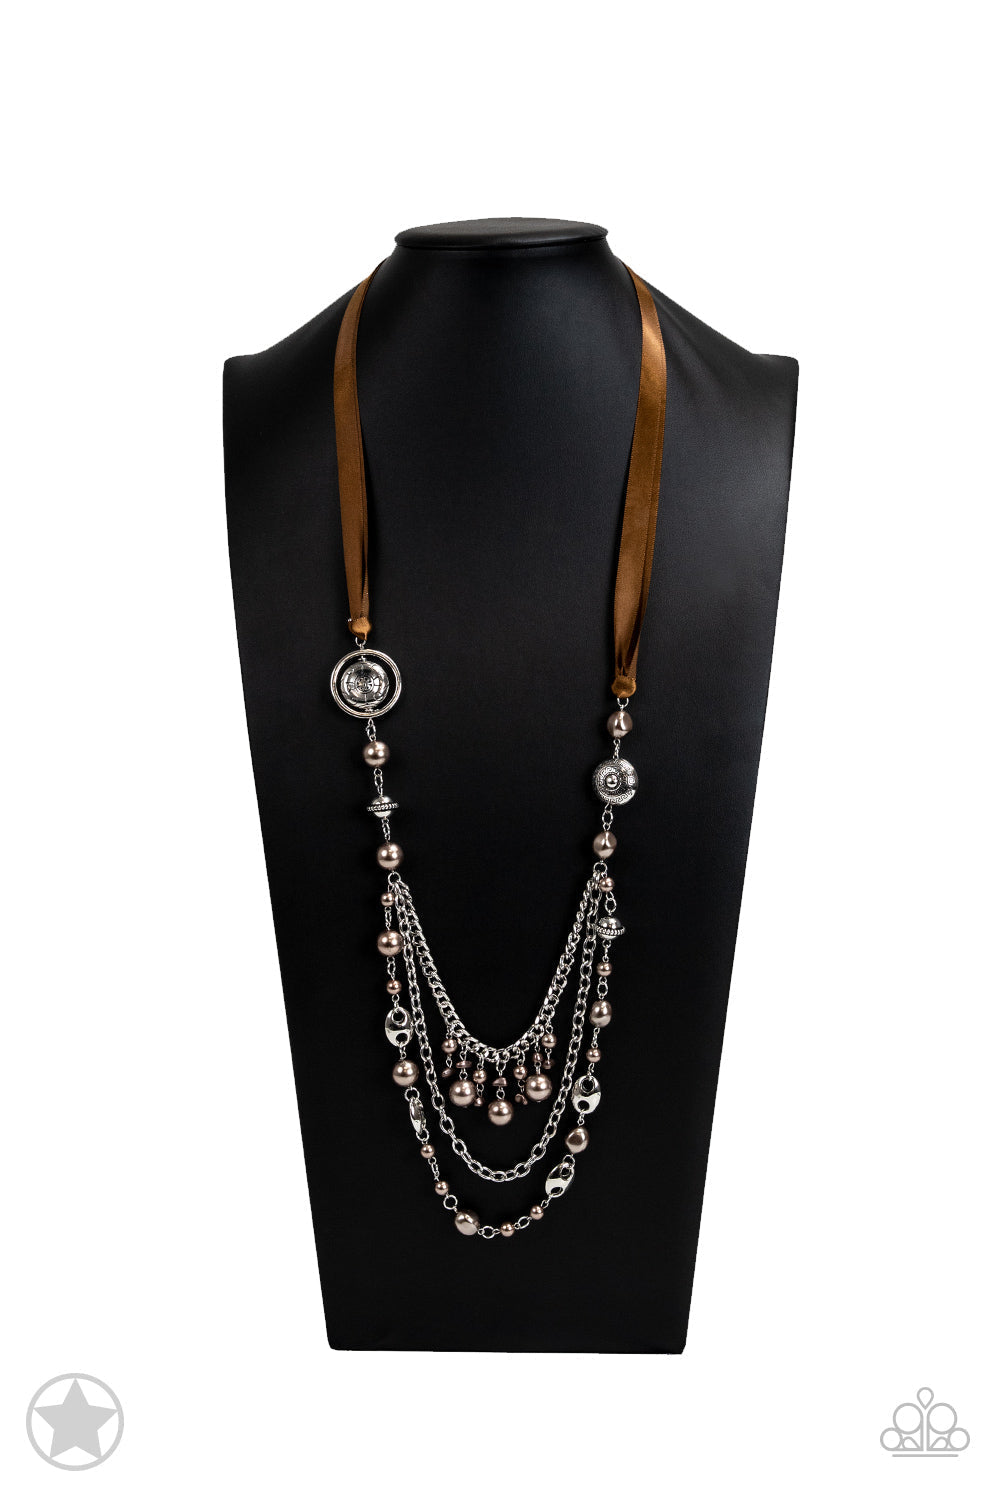 All The Trimmings - Brown and Silver Necklace - Paparazzi Accessories - A silky brown ribbon replaces a traditional chain to give an elegant look. Pearly brown beads and funky silver pieces intermix with varying lengths of silver chains to give a fresh take on a Victorian-inspired fashion necklace.